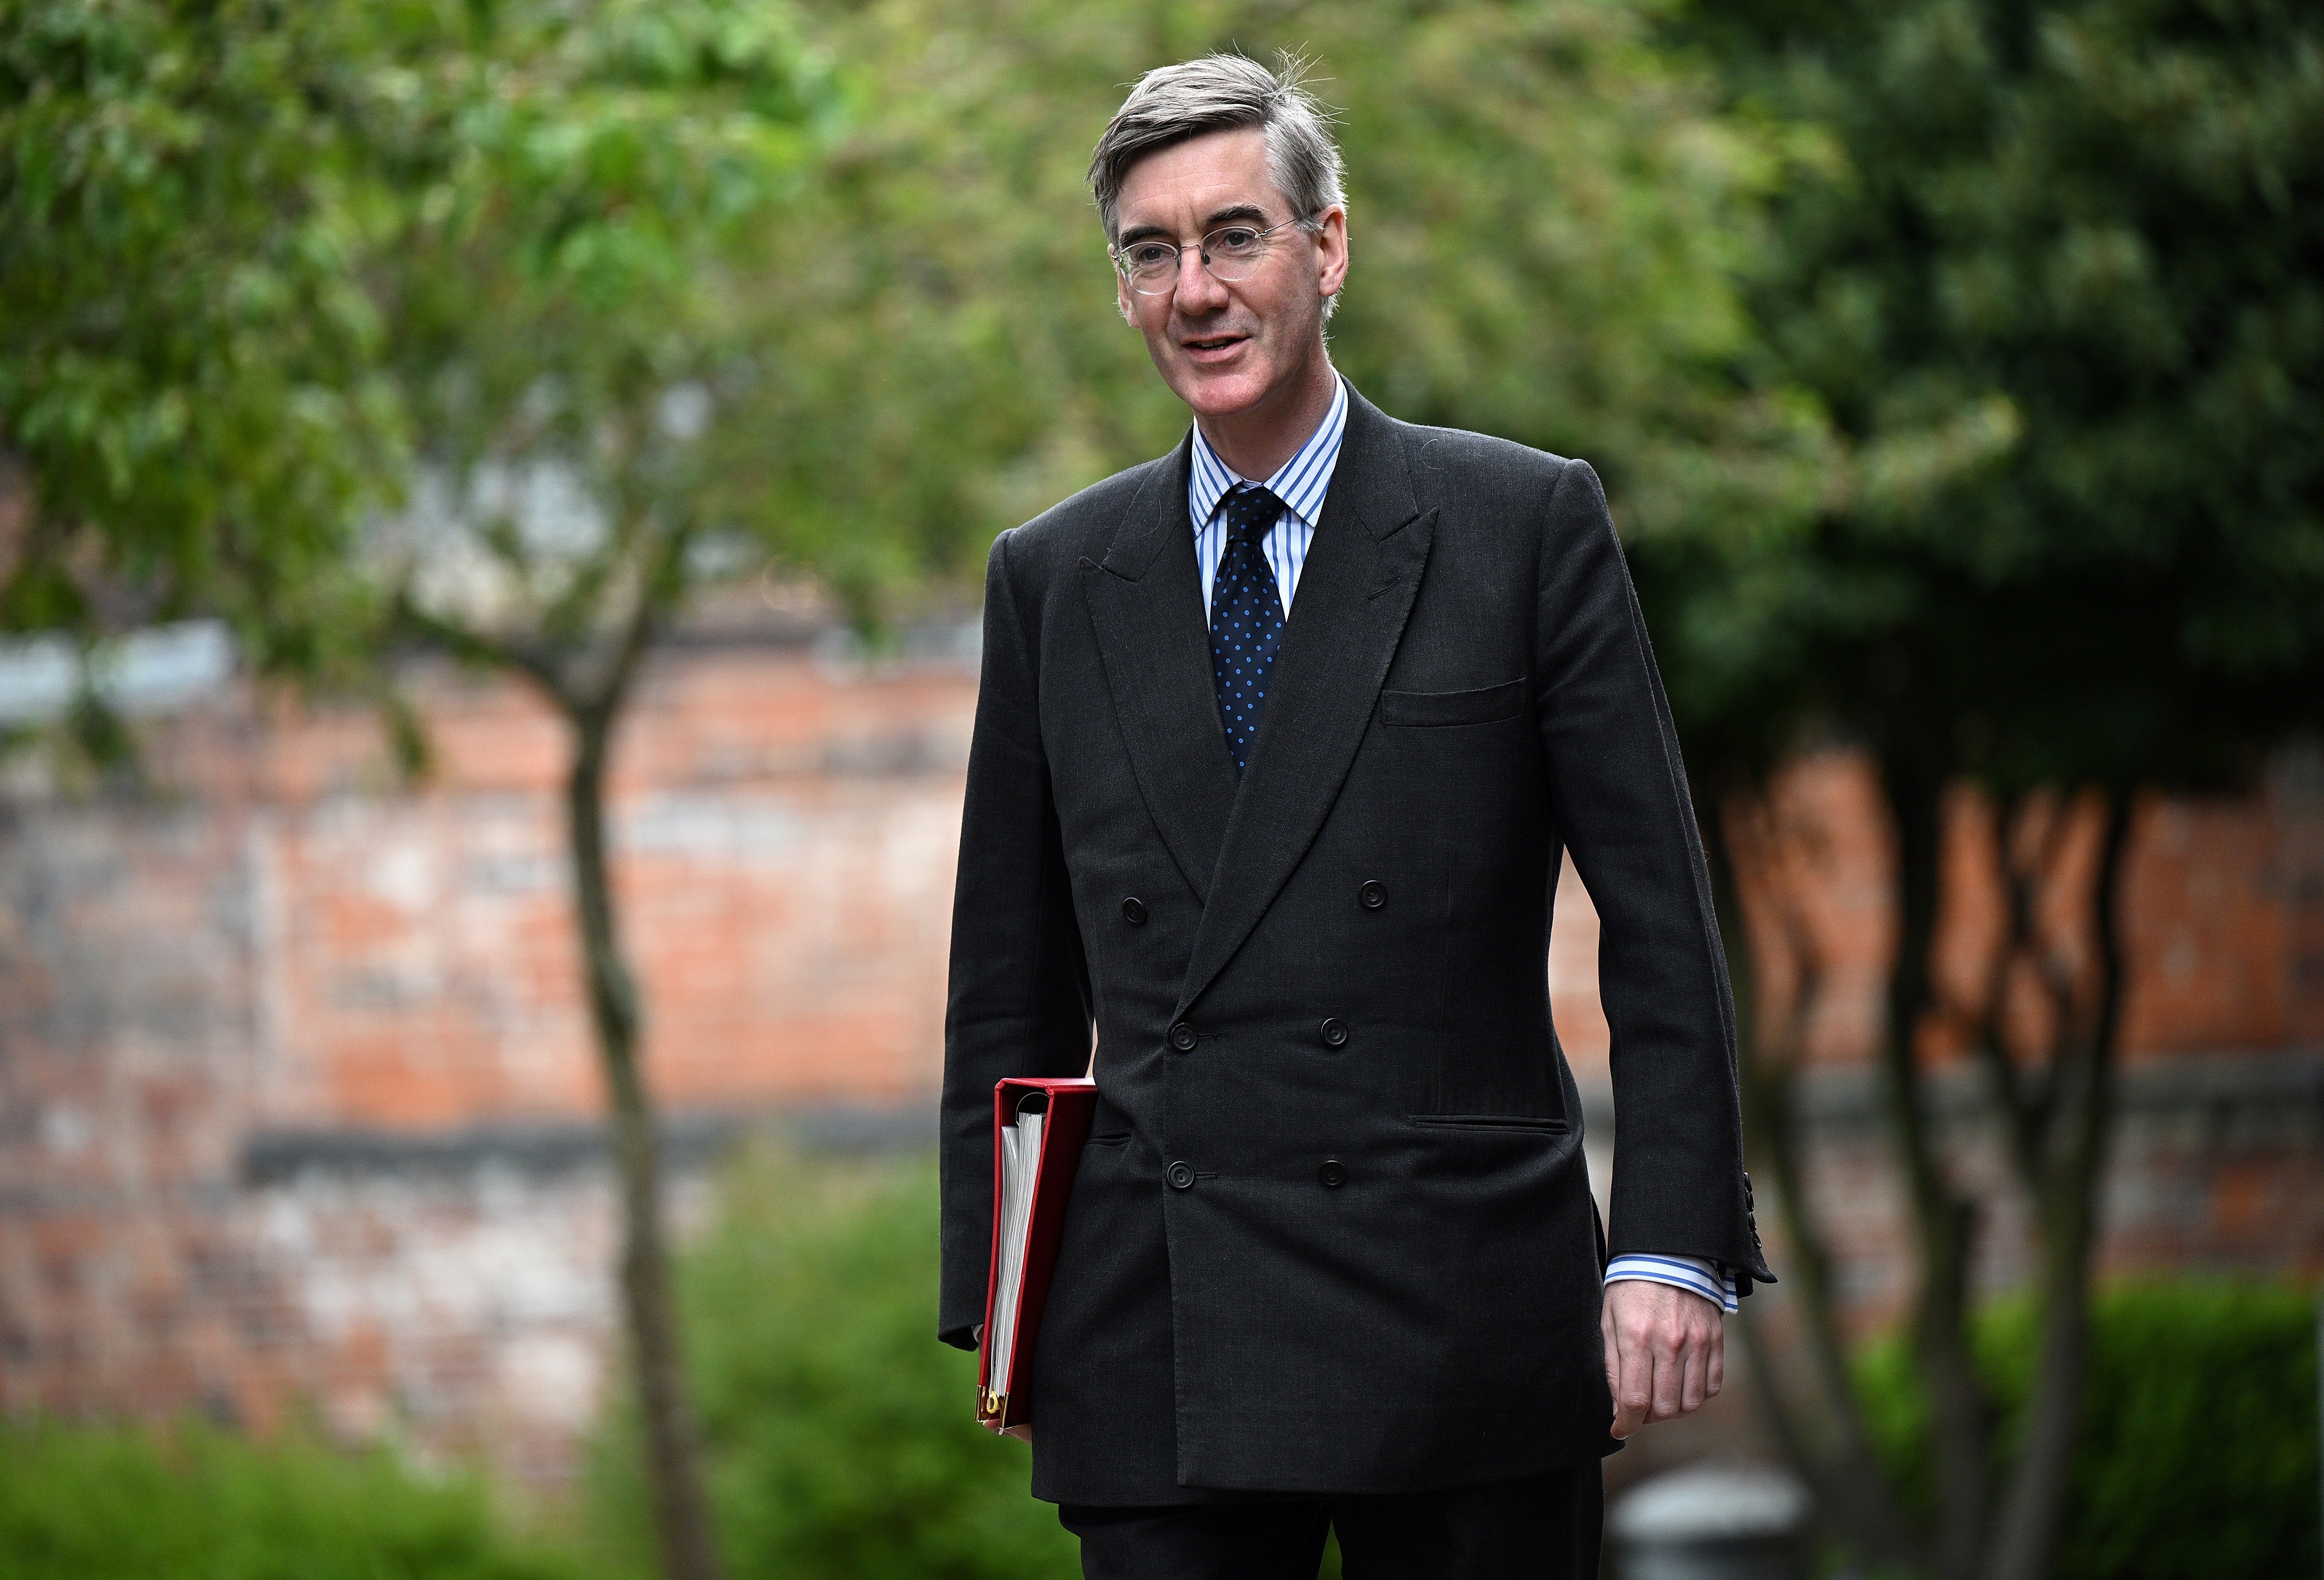 Jacob Rees-Mogg said the plan is to return Civil Service staff numbers to 2016 levels (Oli Scarff/PA)